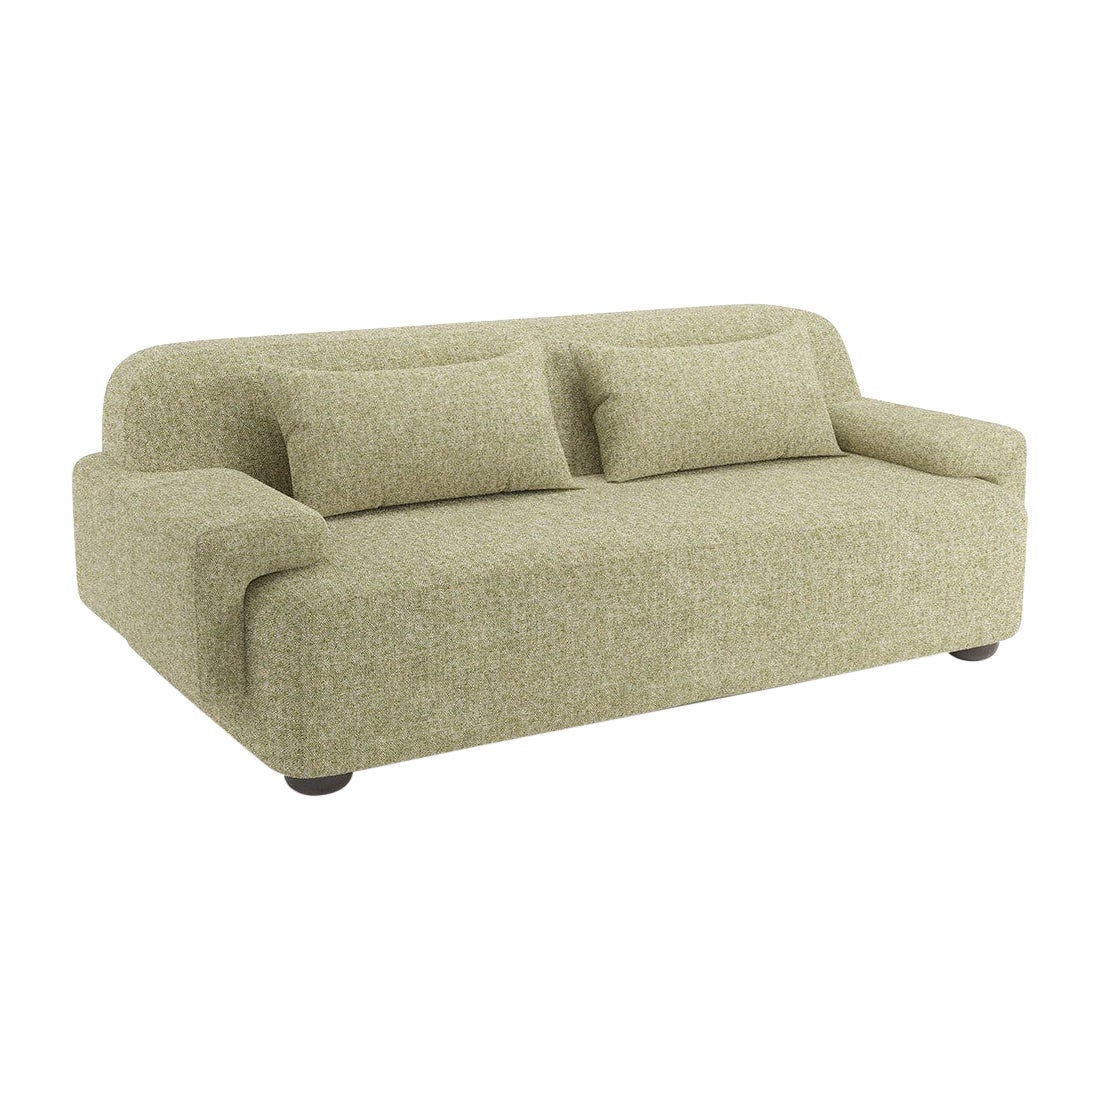 Popus Editions Lena 3 Seater Sofa in Cactus London Linen Fabric For Sale